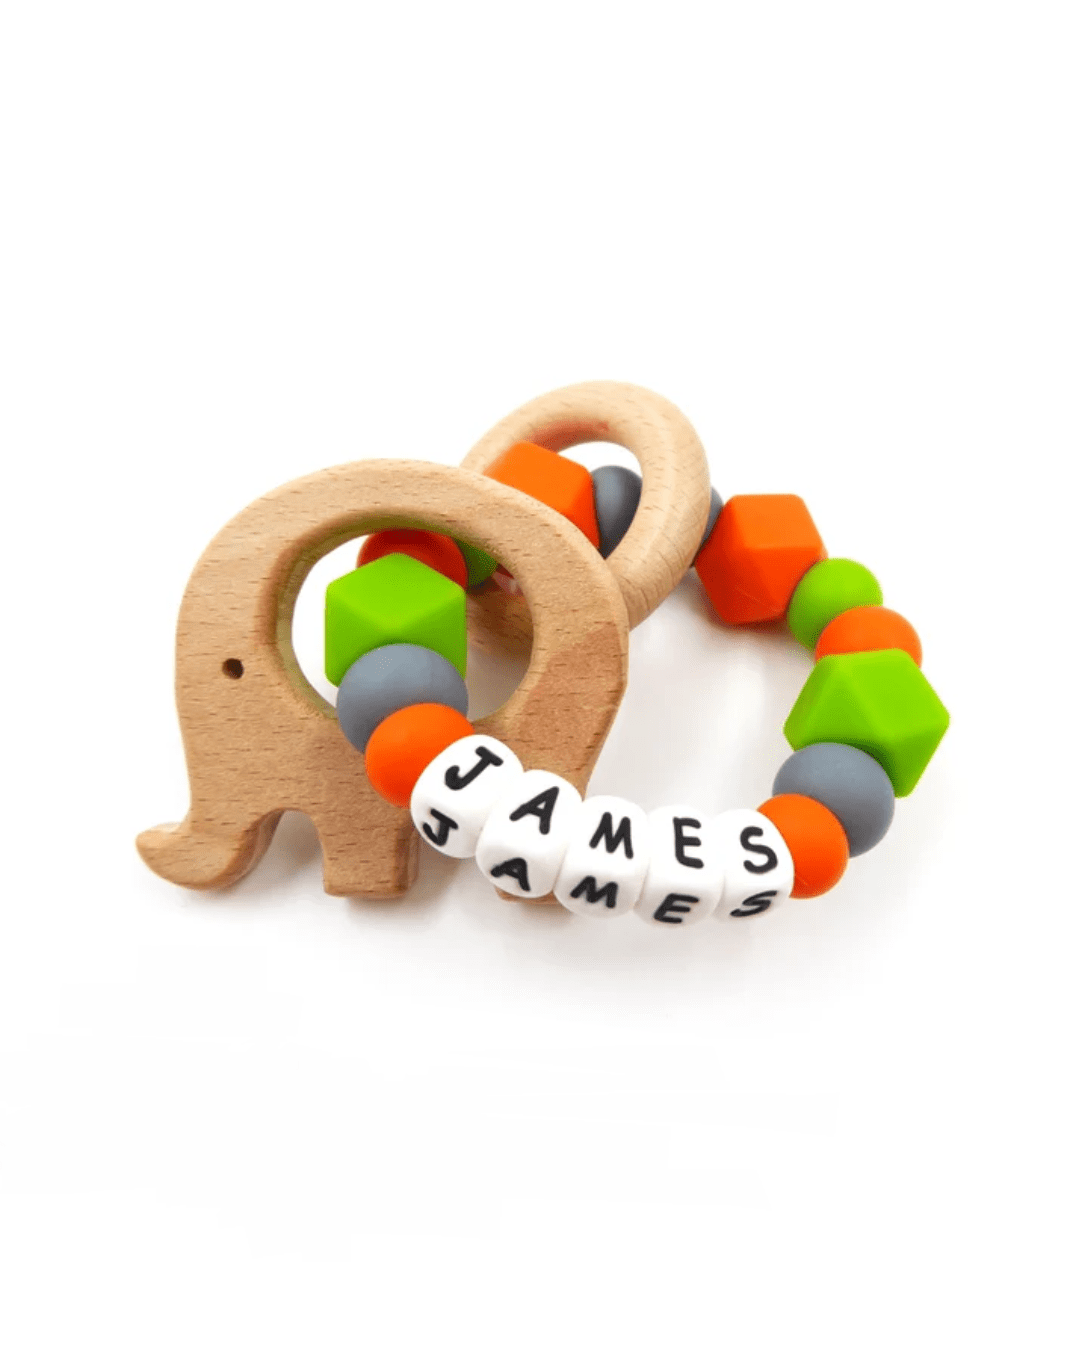 ring bearer proposal gifts personalized rattle ring with name